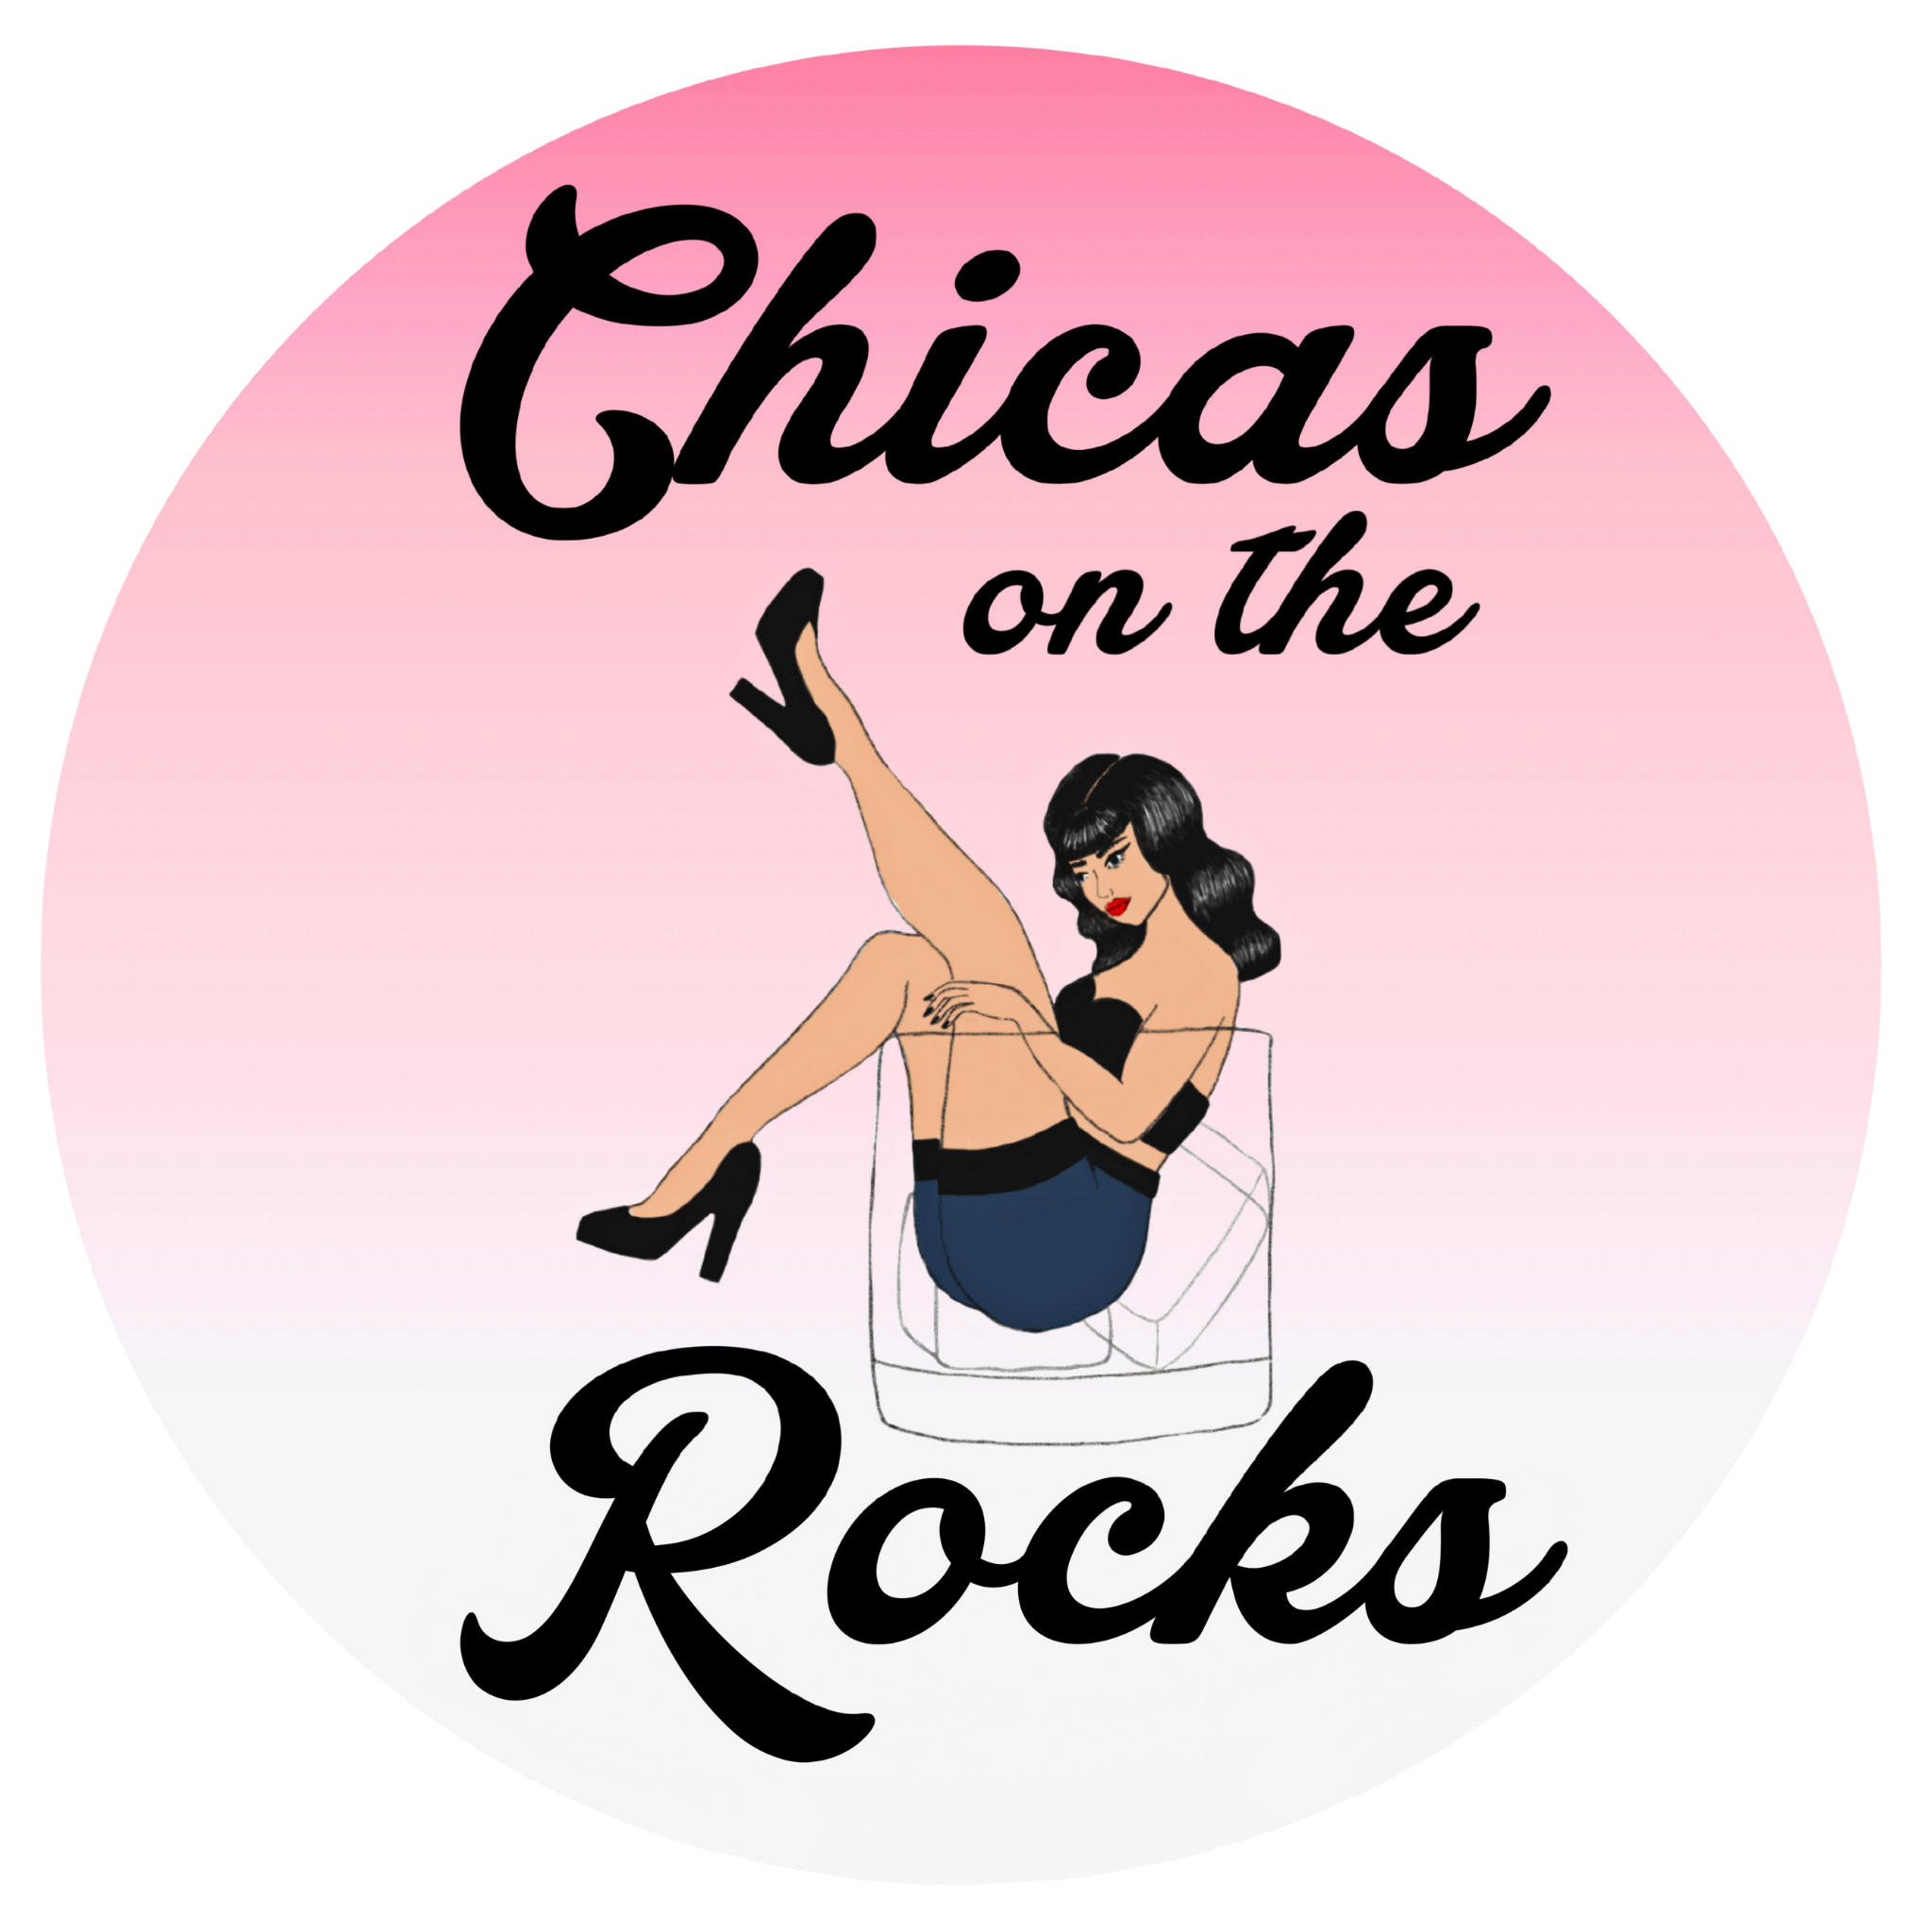 Chicas on the Rocks logo